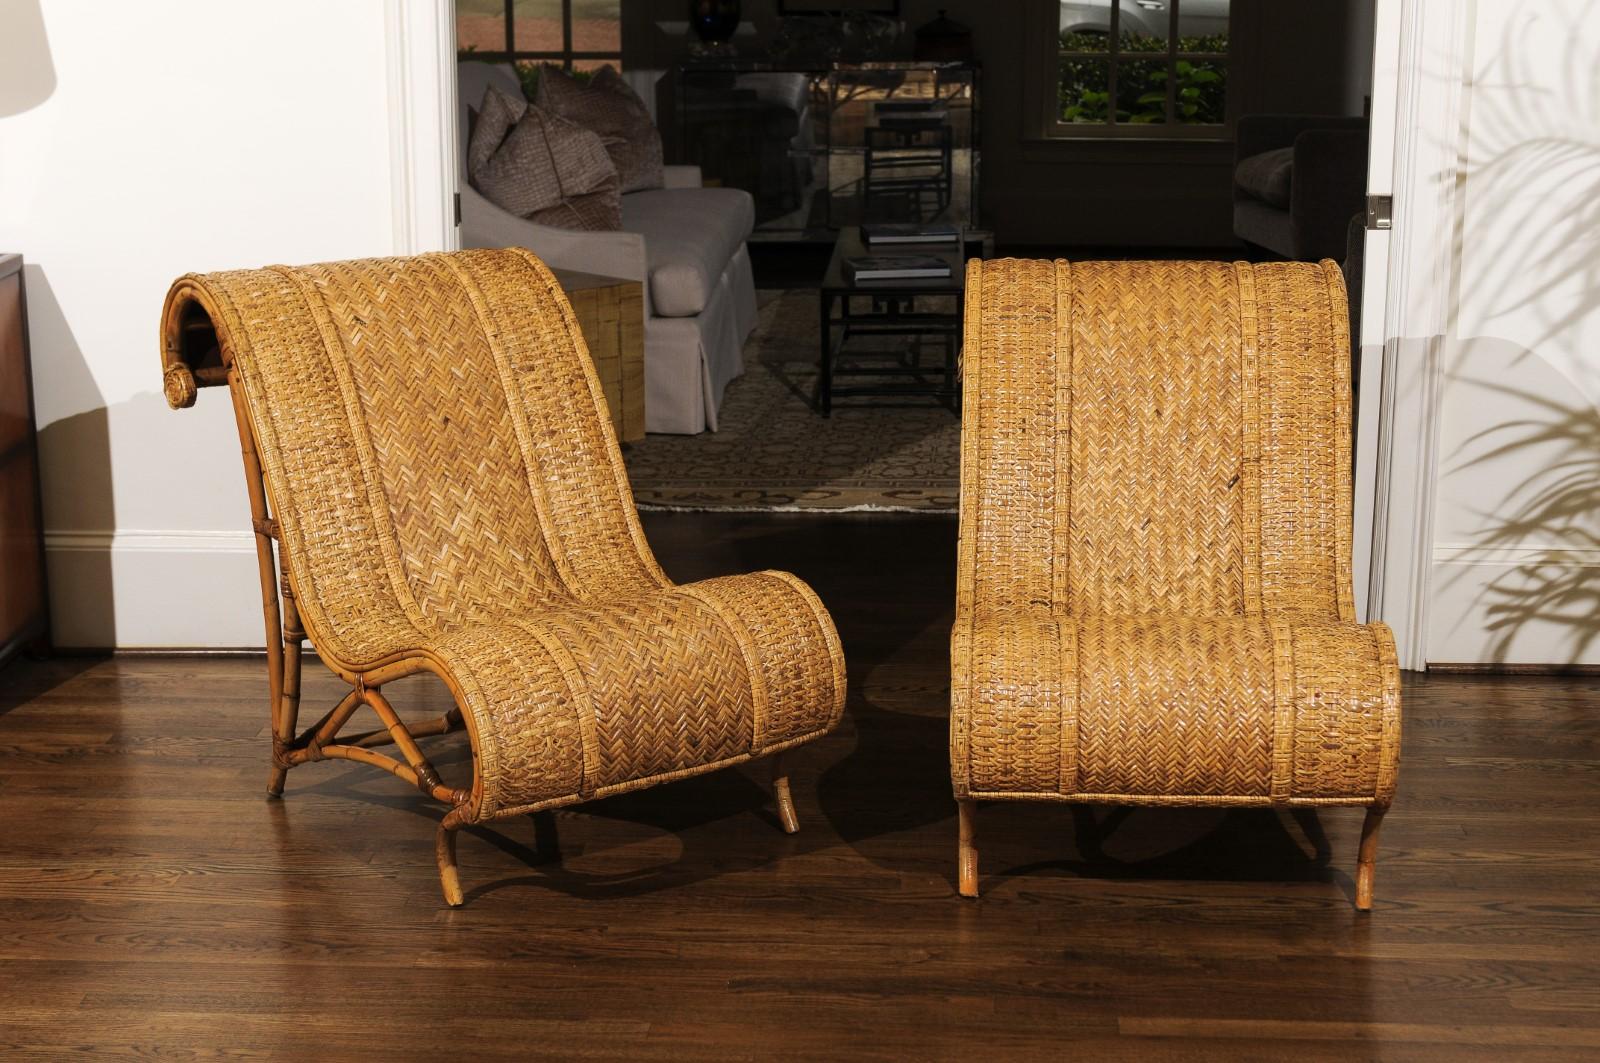 A stunning, highly decorative pair of rattan and raffia slipper chairs with matching ottomans, circa 1980. Stout, comfortable, beautifully conceived rattan frame with fabulous curves and detail veneered in woven cane. Craftsmanship that is beyond